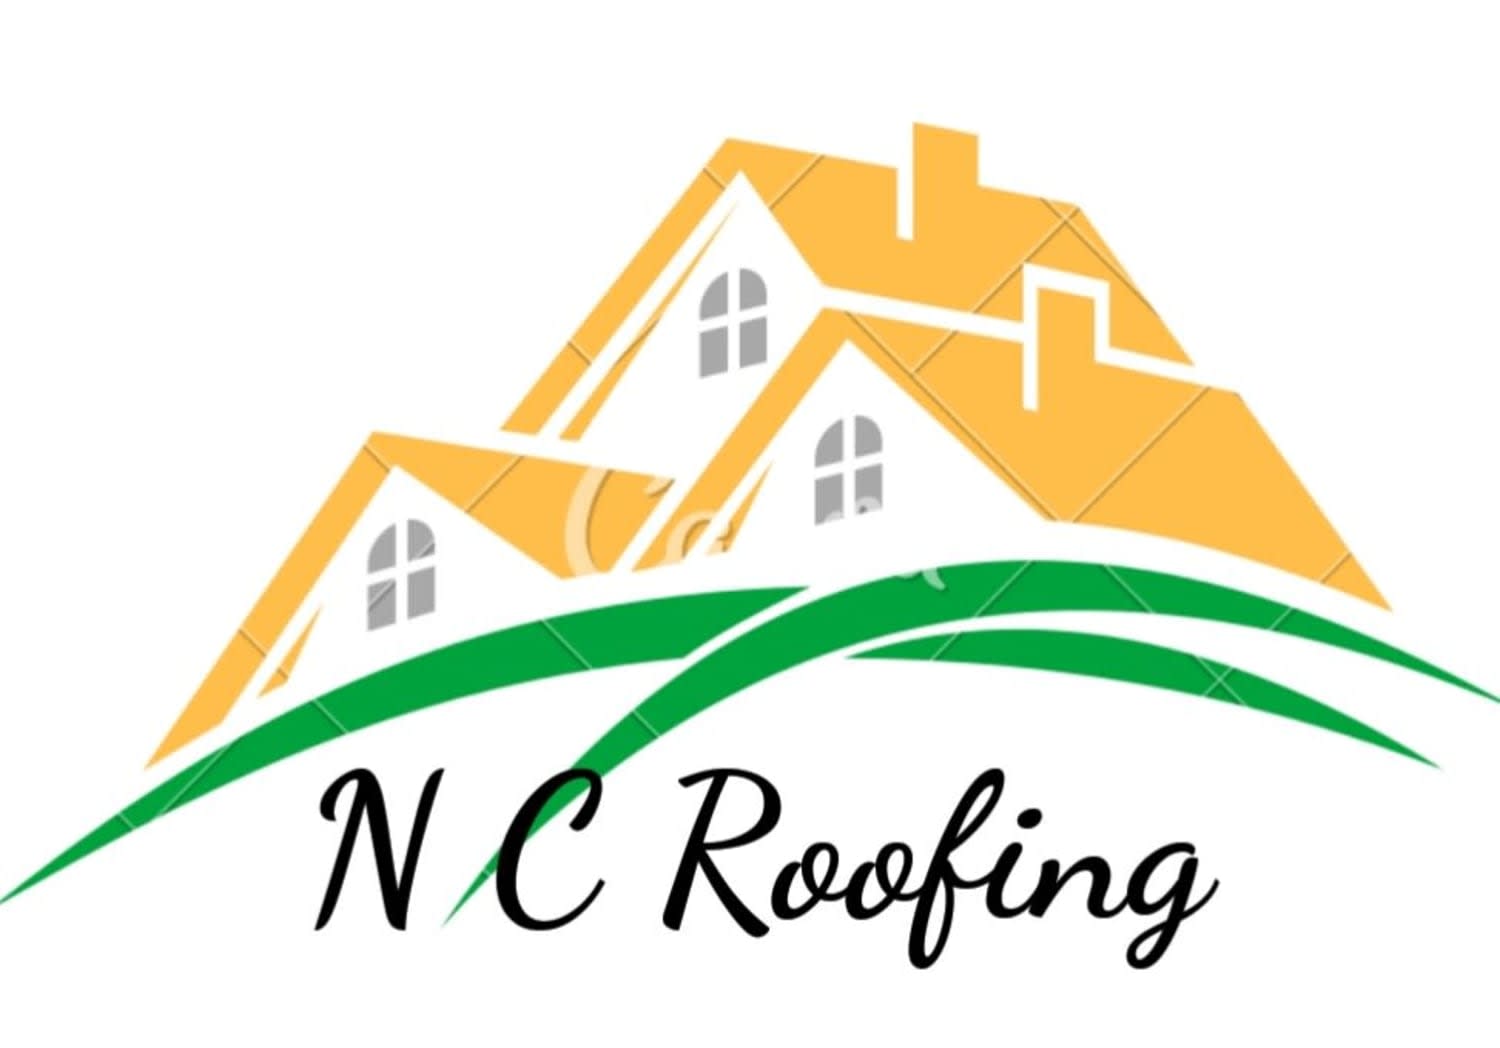 Nc Roofing